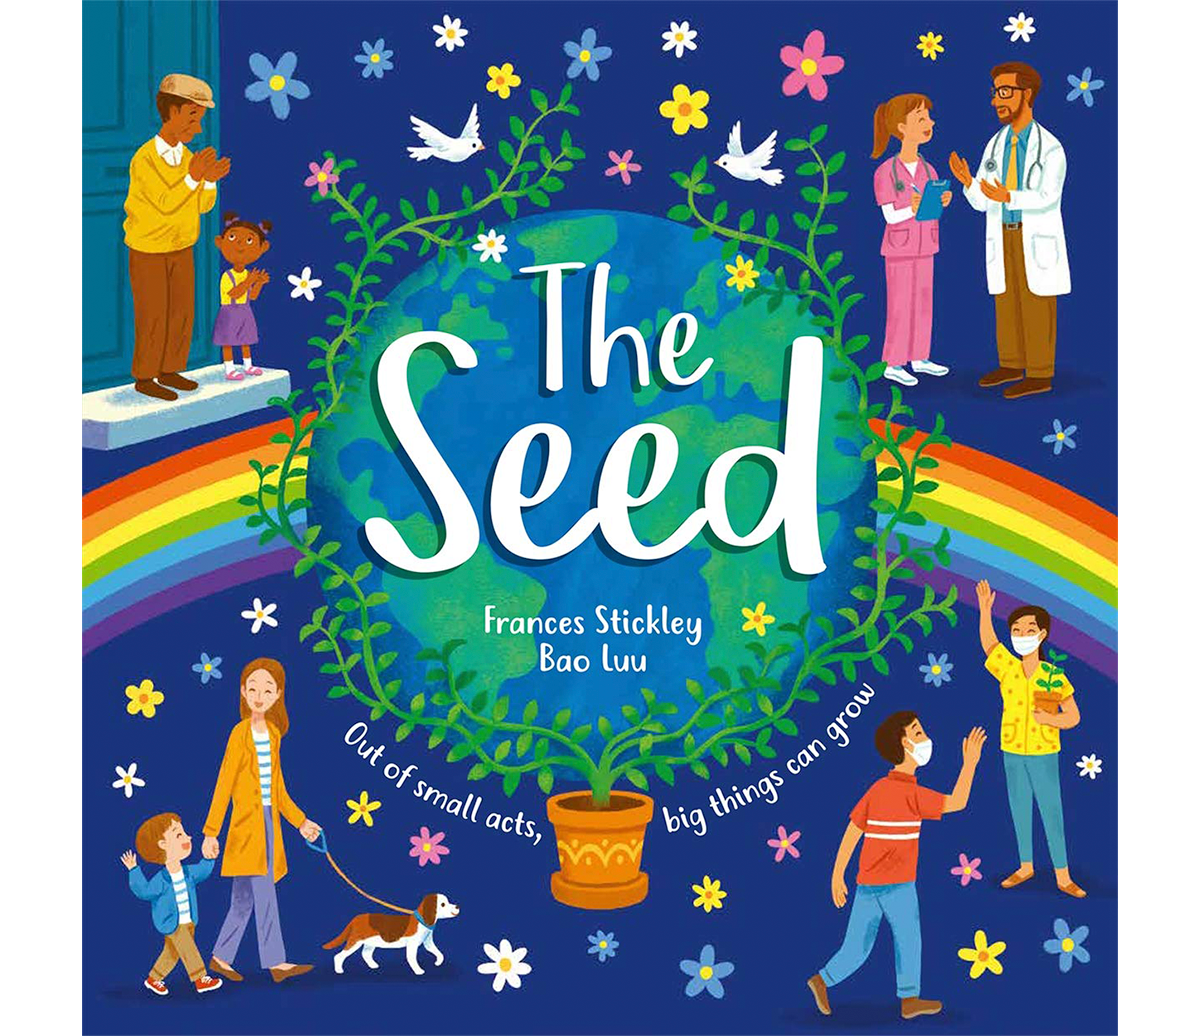 frances-stickley-the-seed.png